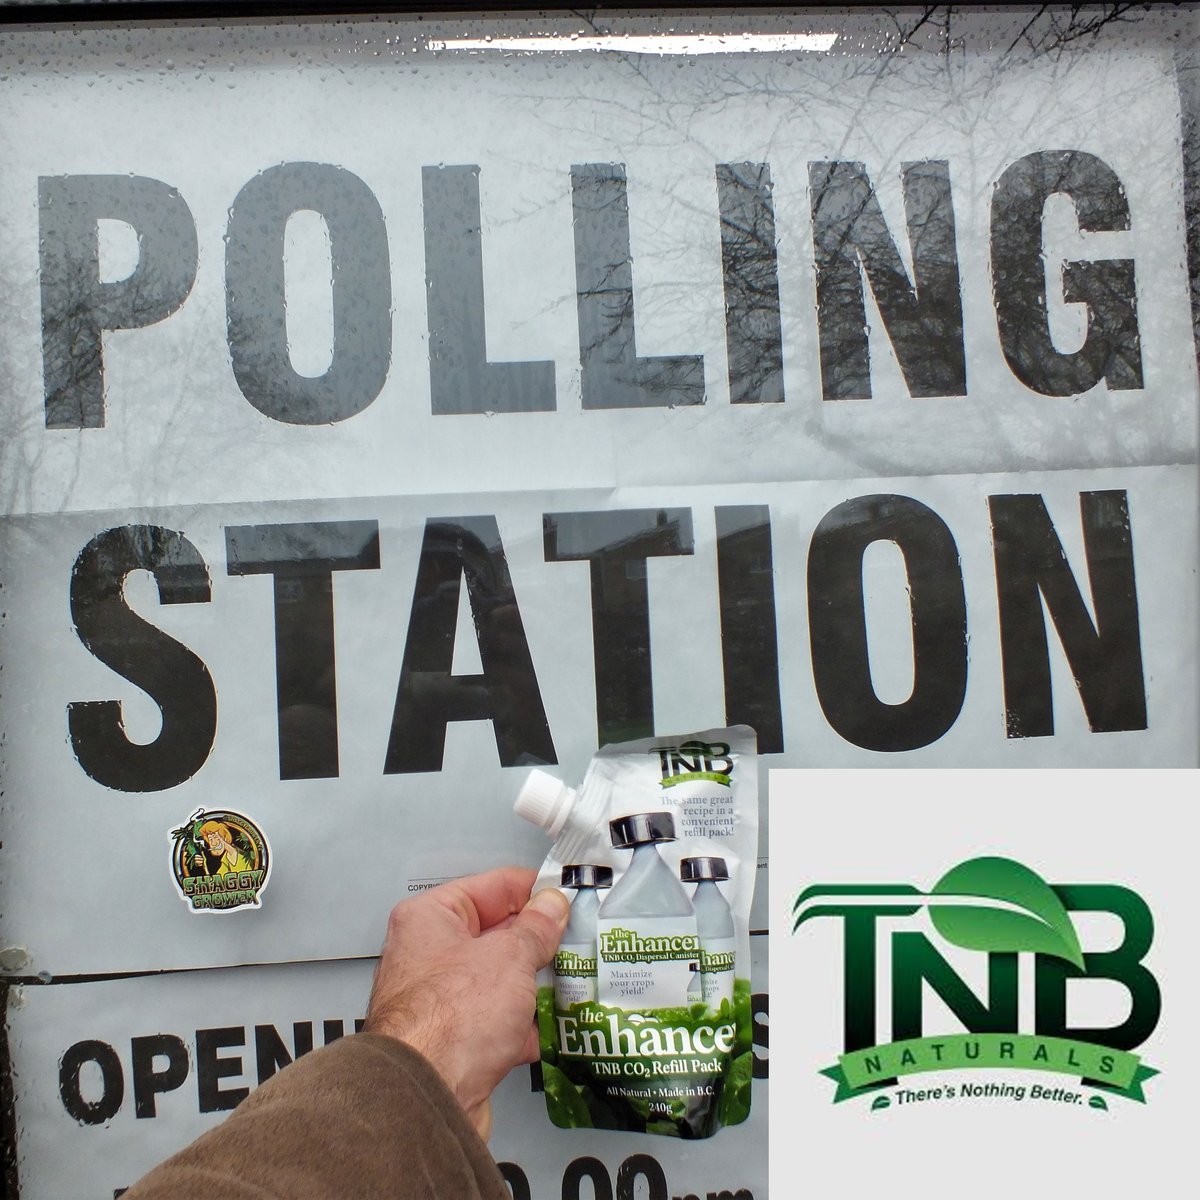 I won a vote of confidence yesterday. I was one of those selected for sponsorship by TNB Naturals. Happy days!! Don't forget to vote today UK residents in the #GeneralElection2019 
#TeamTNB #Enhancer #Refill 
#growyourown #gyo #cannabis 
#tnbnaturals #tnb #tnbnaturalsbrand